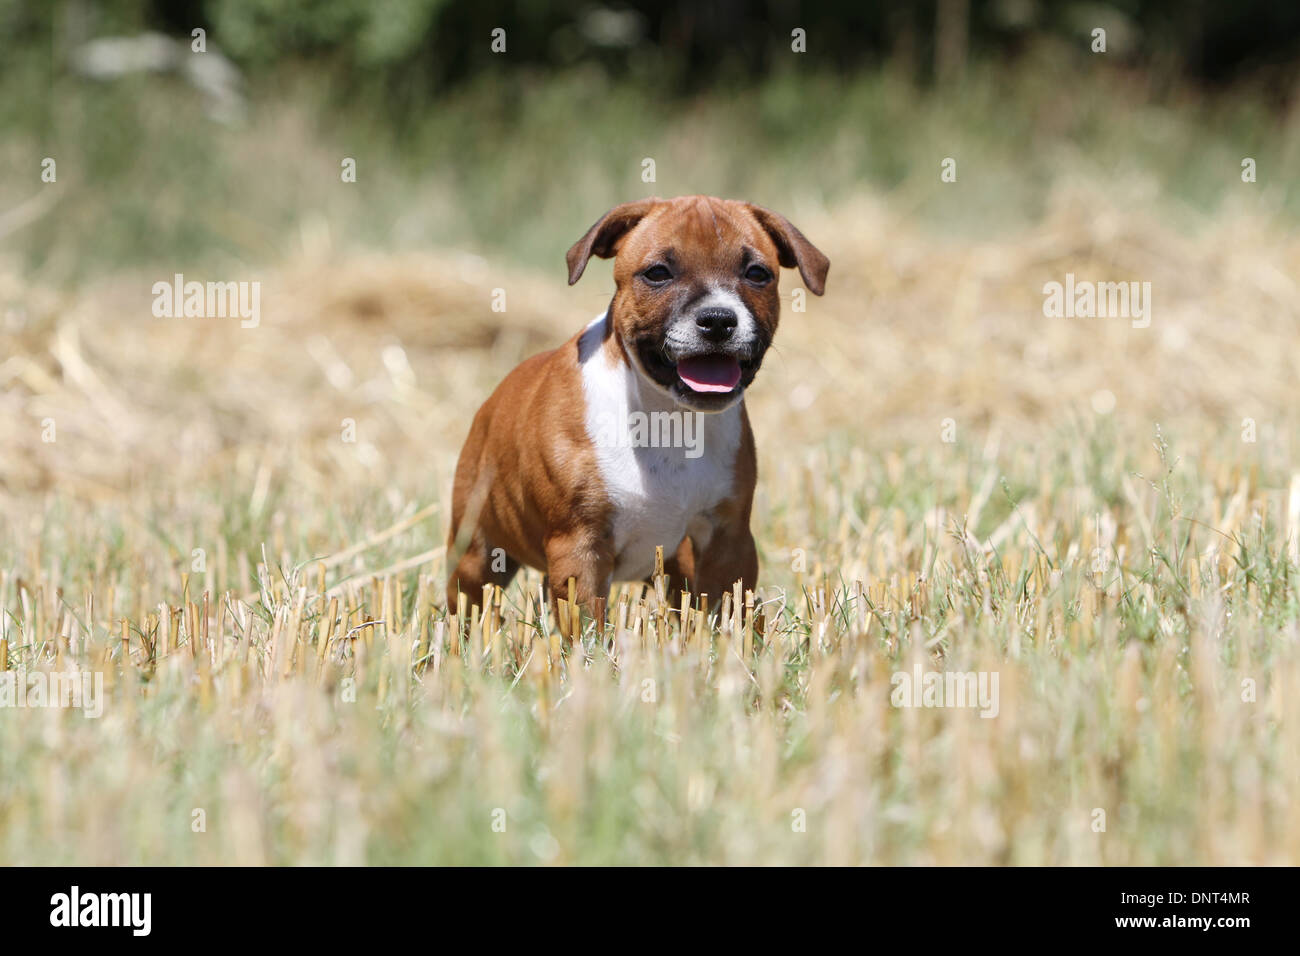 dog Staffordshire Bull Terrier / Staffie  puppy standing in a field Stock Photo